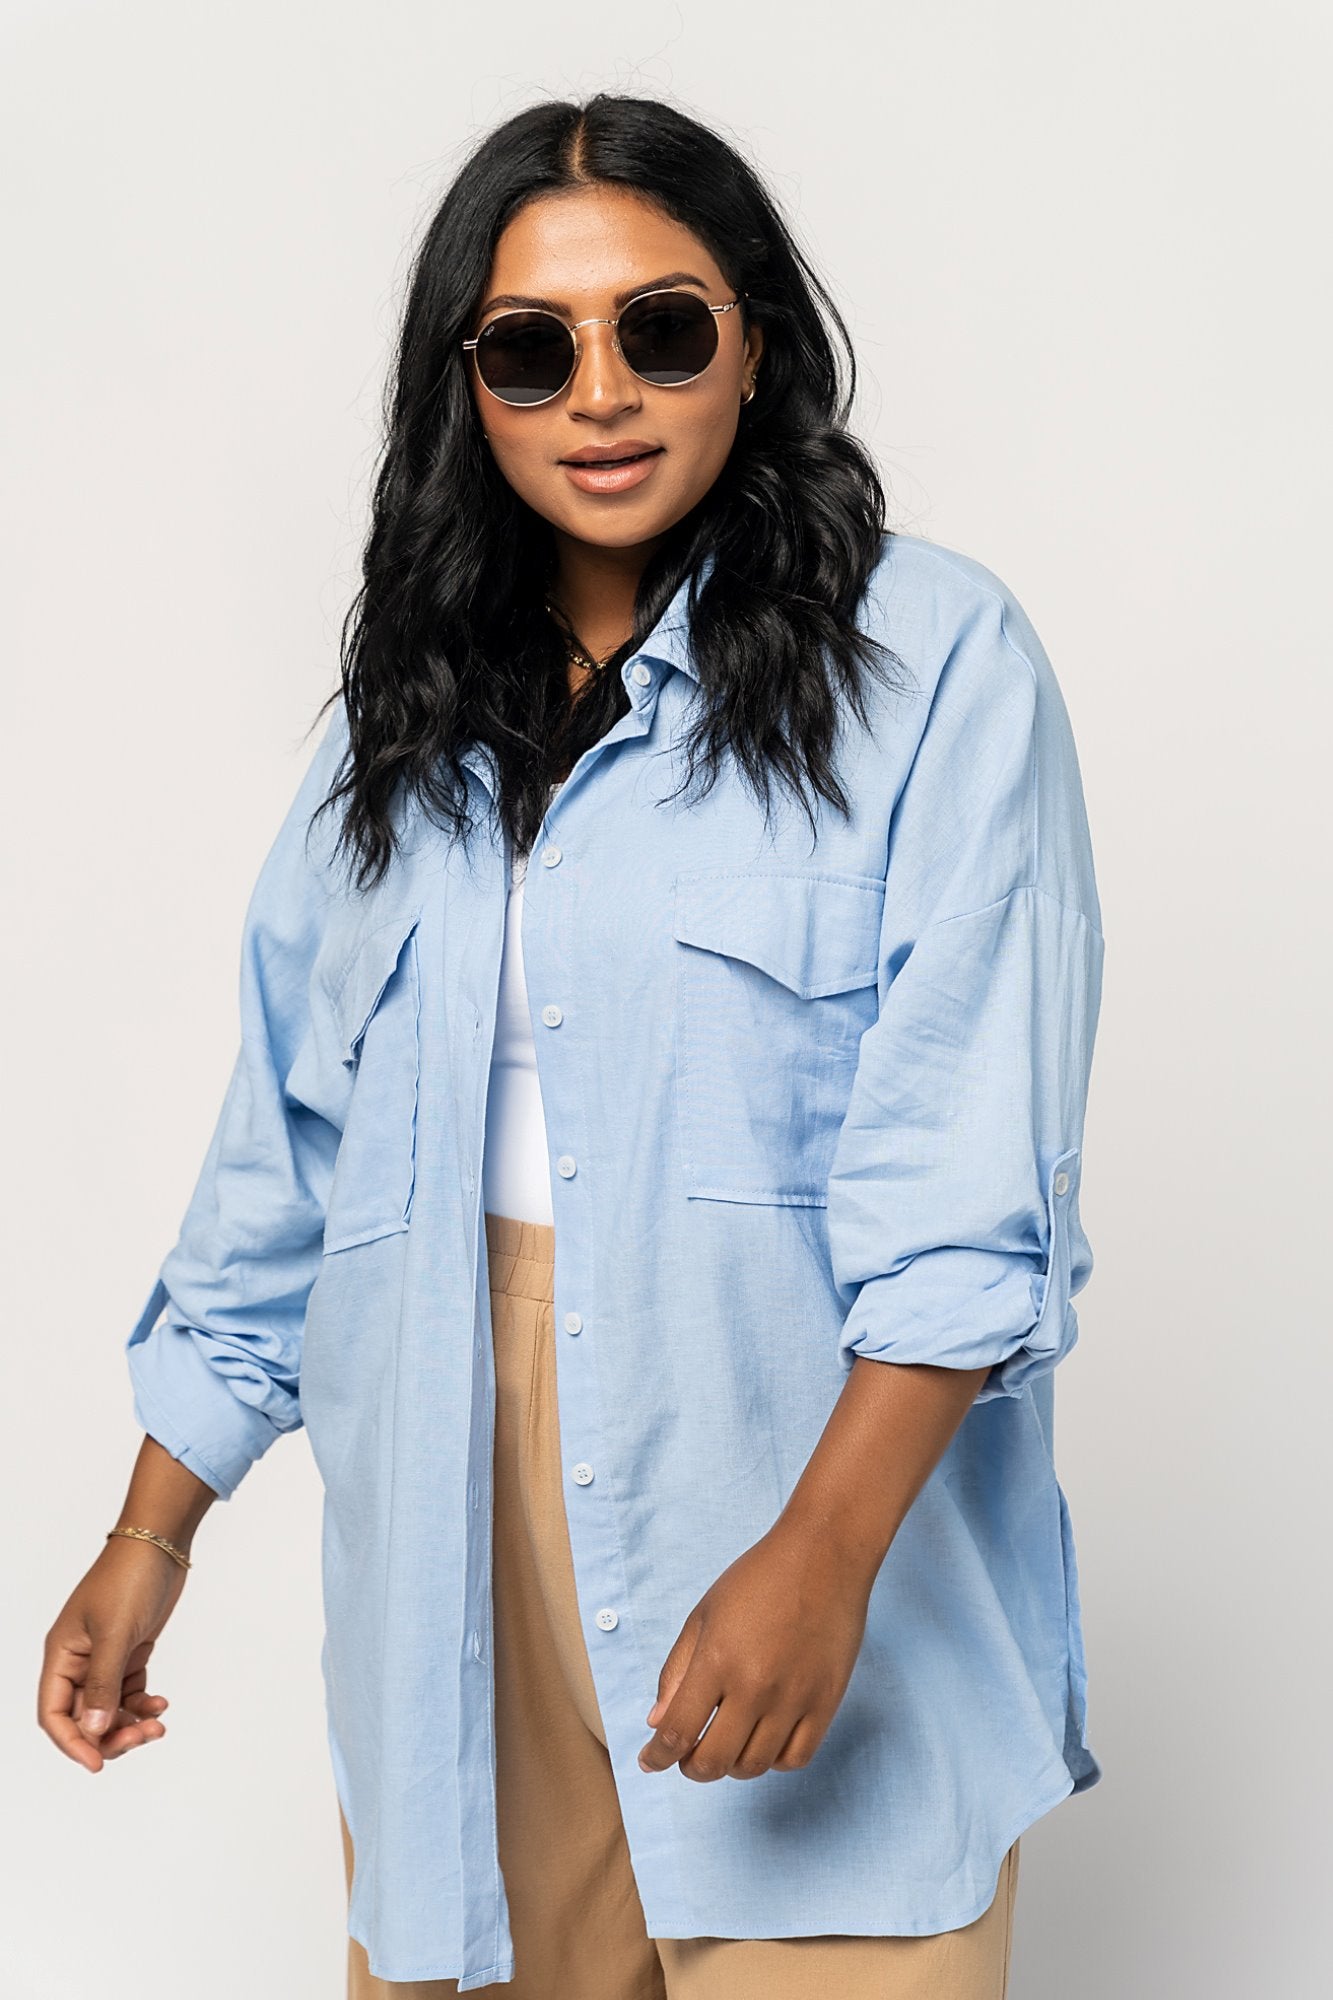 Cleo Top in Blue Holley Girl 